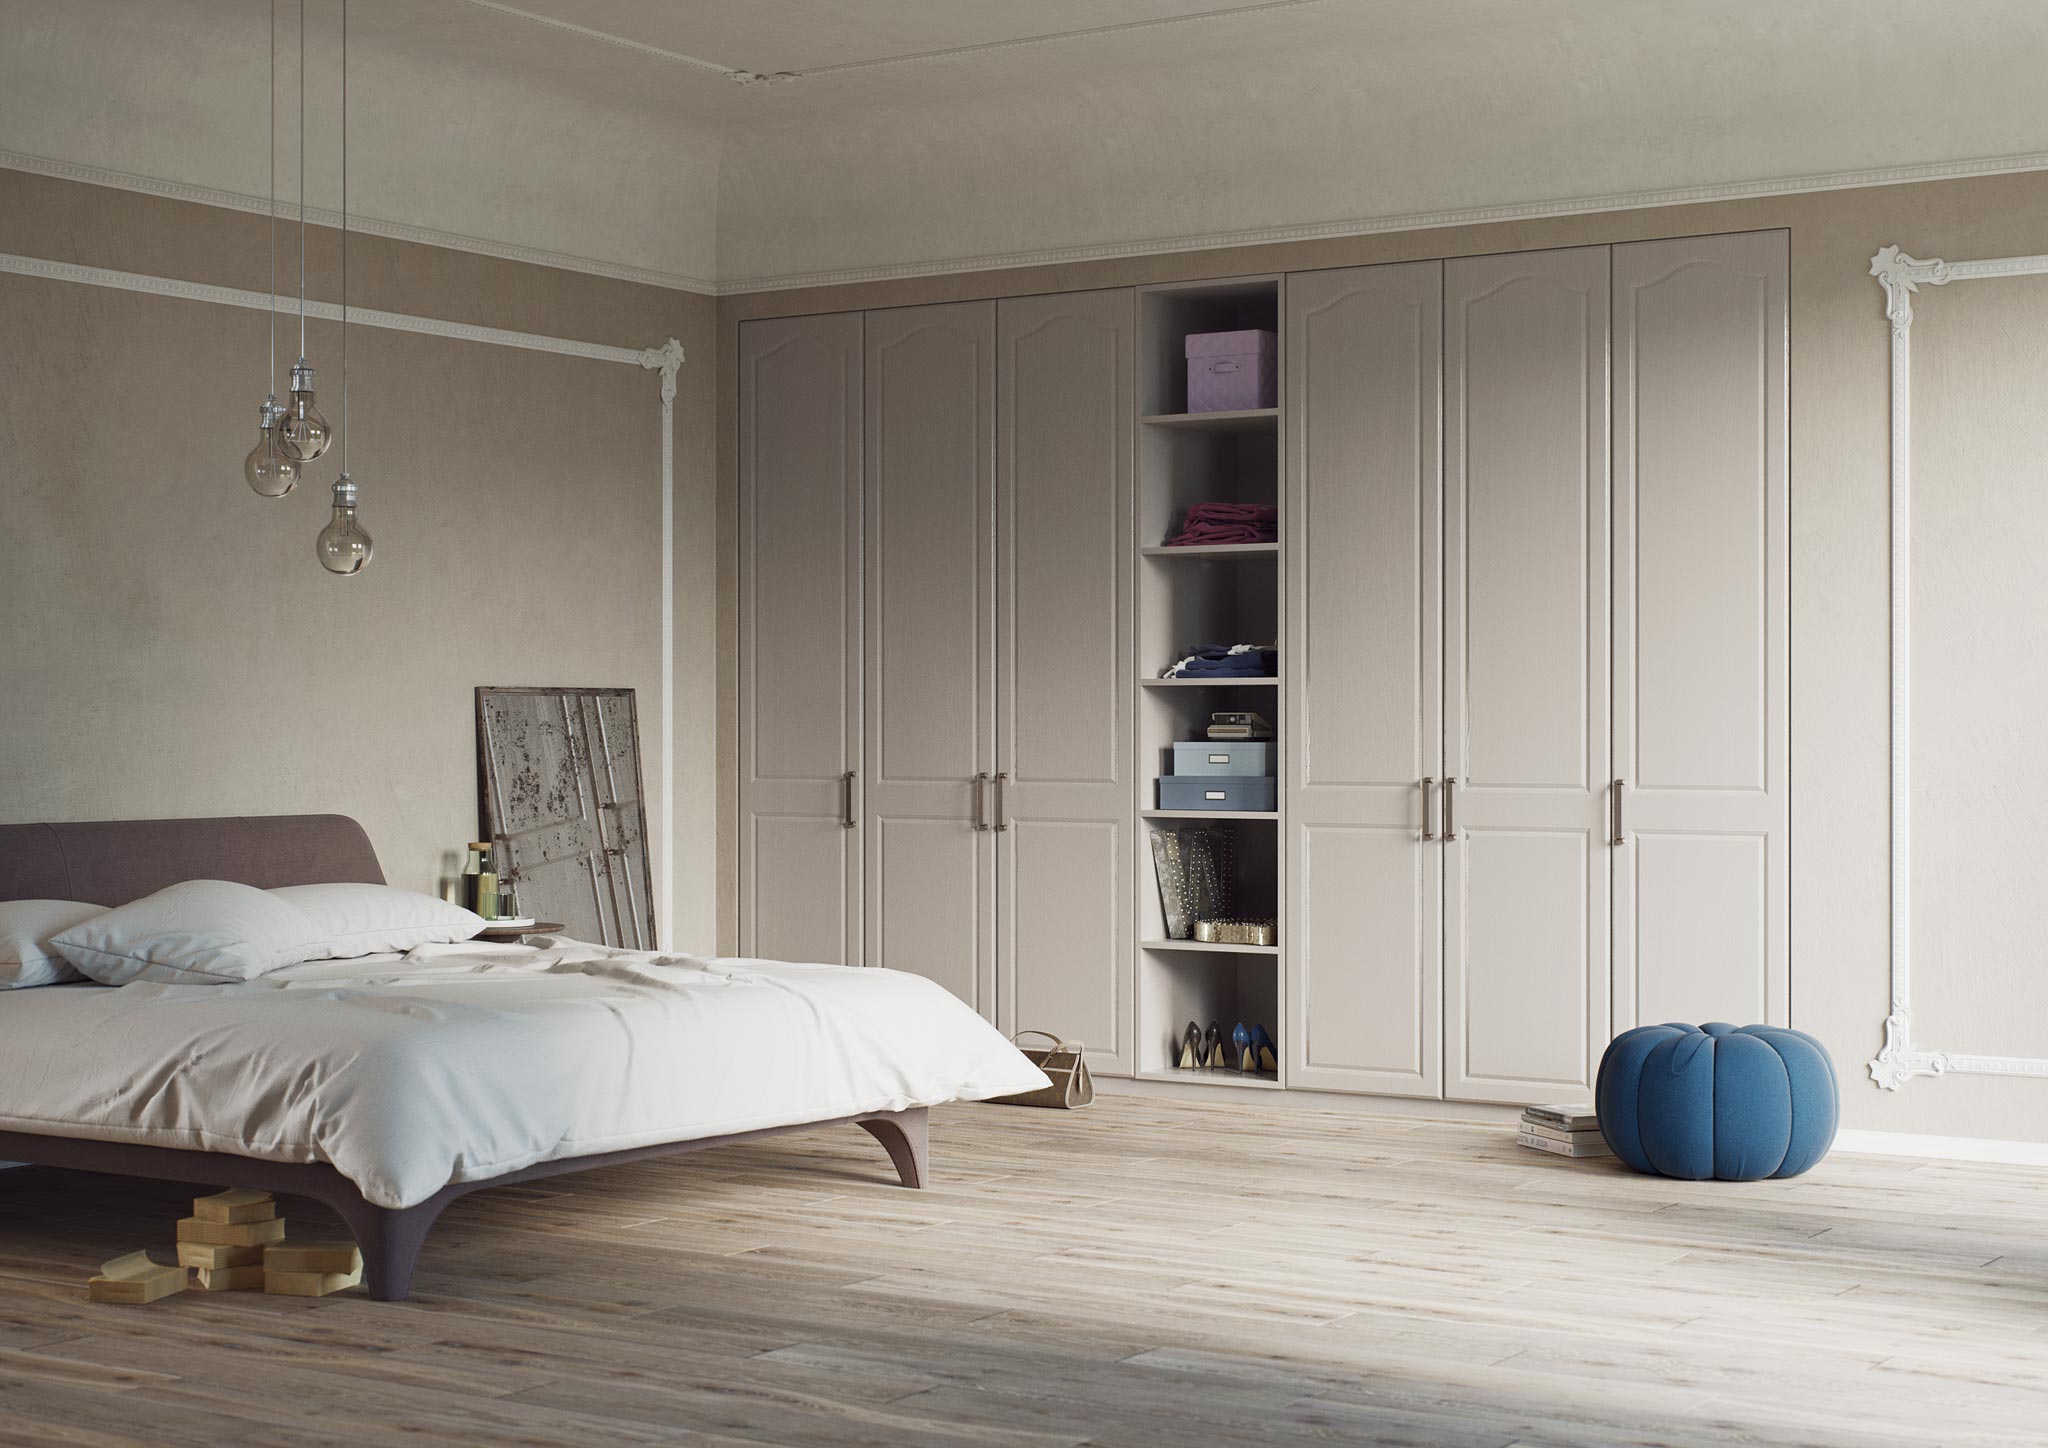 New sudbury style bedroom in any colour